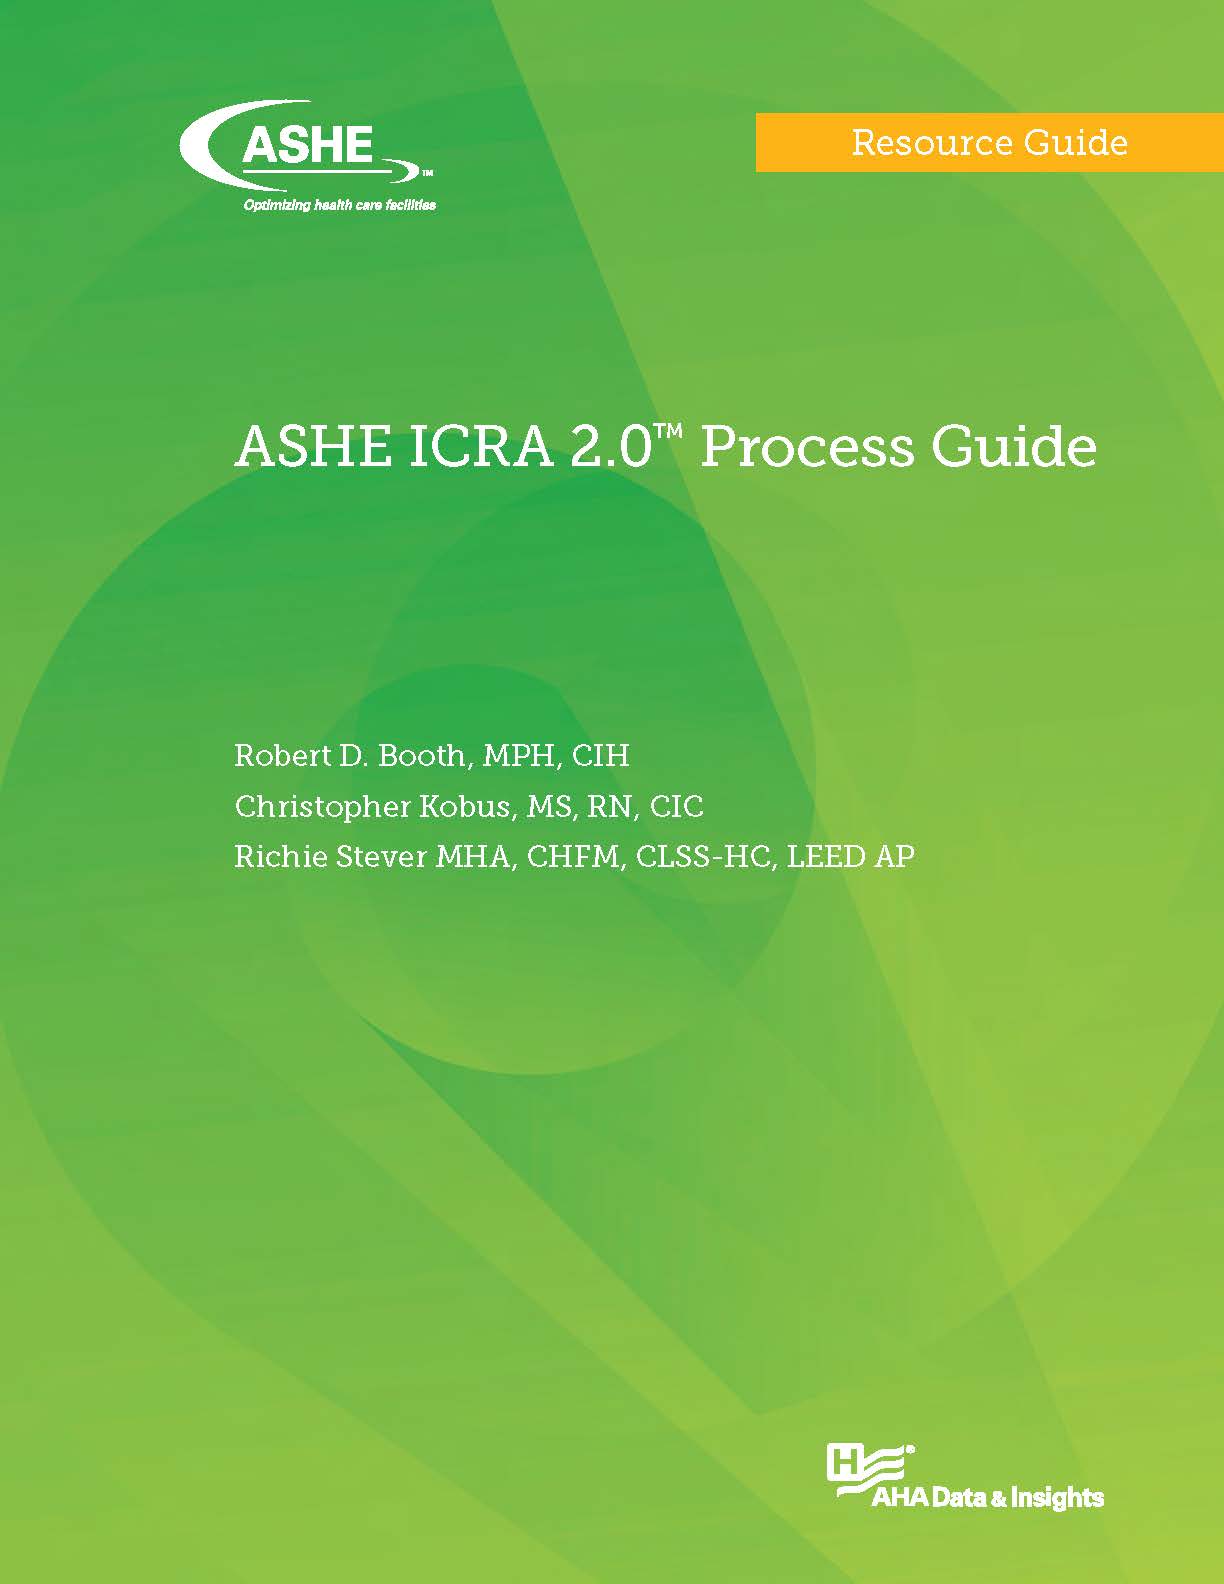 ASHE ICRA 2.0™ Process Guide: Digital Edition